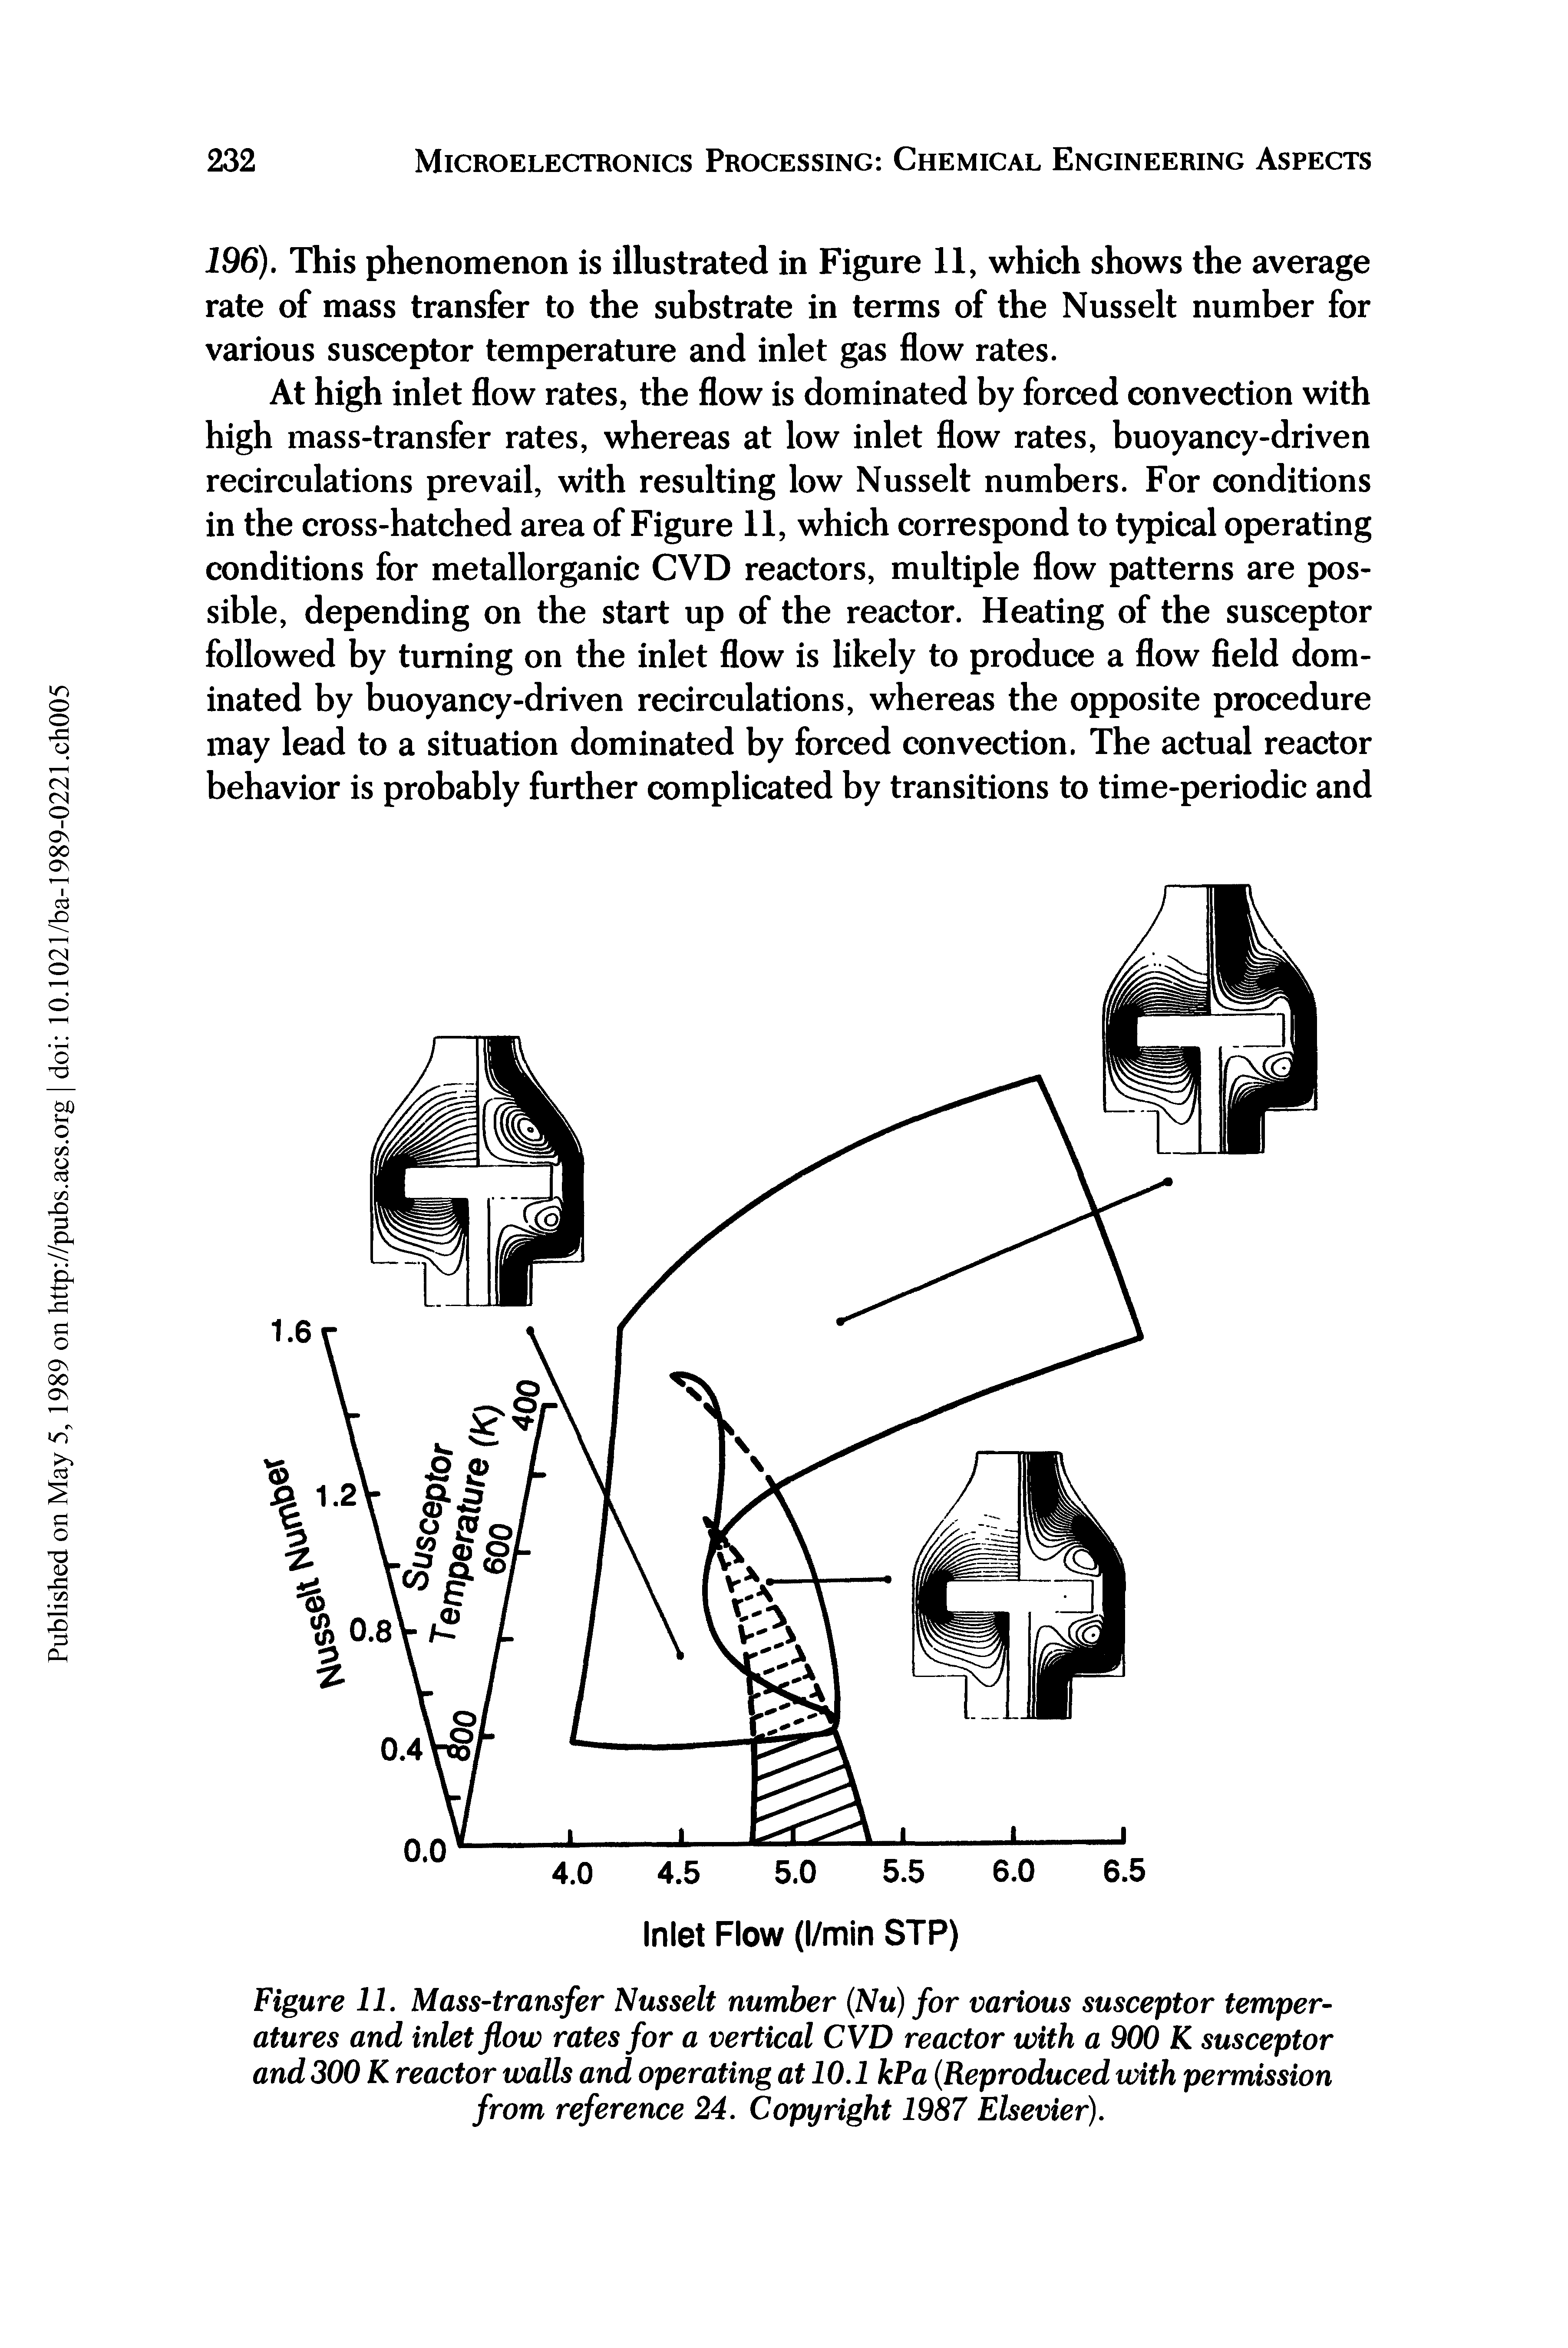 Figure 11. Mass-transfer Nusselt number (Nu) for various susceptor temperatures and inlet flow rates for a vertical CVD reactor with a 900 K susceptor and 300 K reactor walls and operating at 10.1 kPa (Reproduced with permission from reference 24. Copyright 1987 Elsevier).